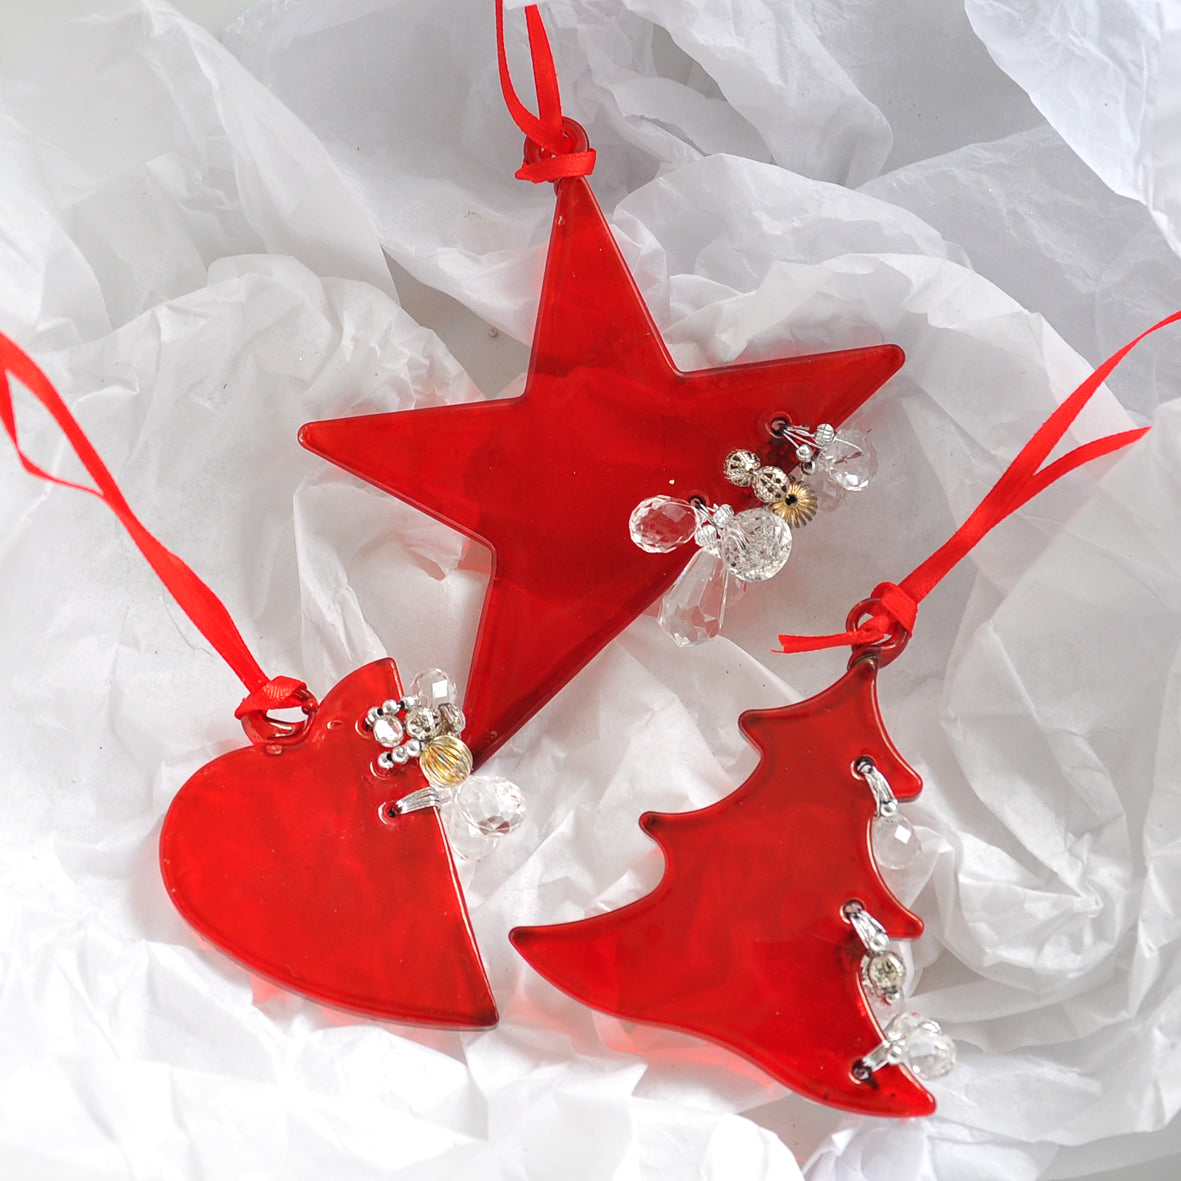 ​This bright red star ornament is made from glass and decorated with beads.